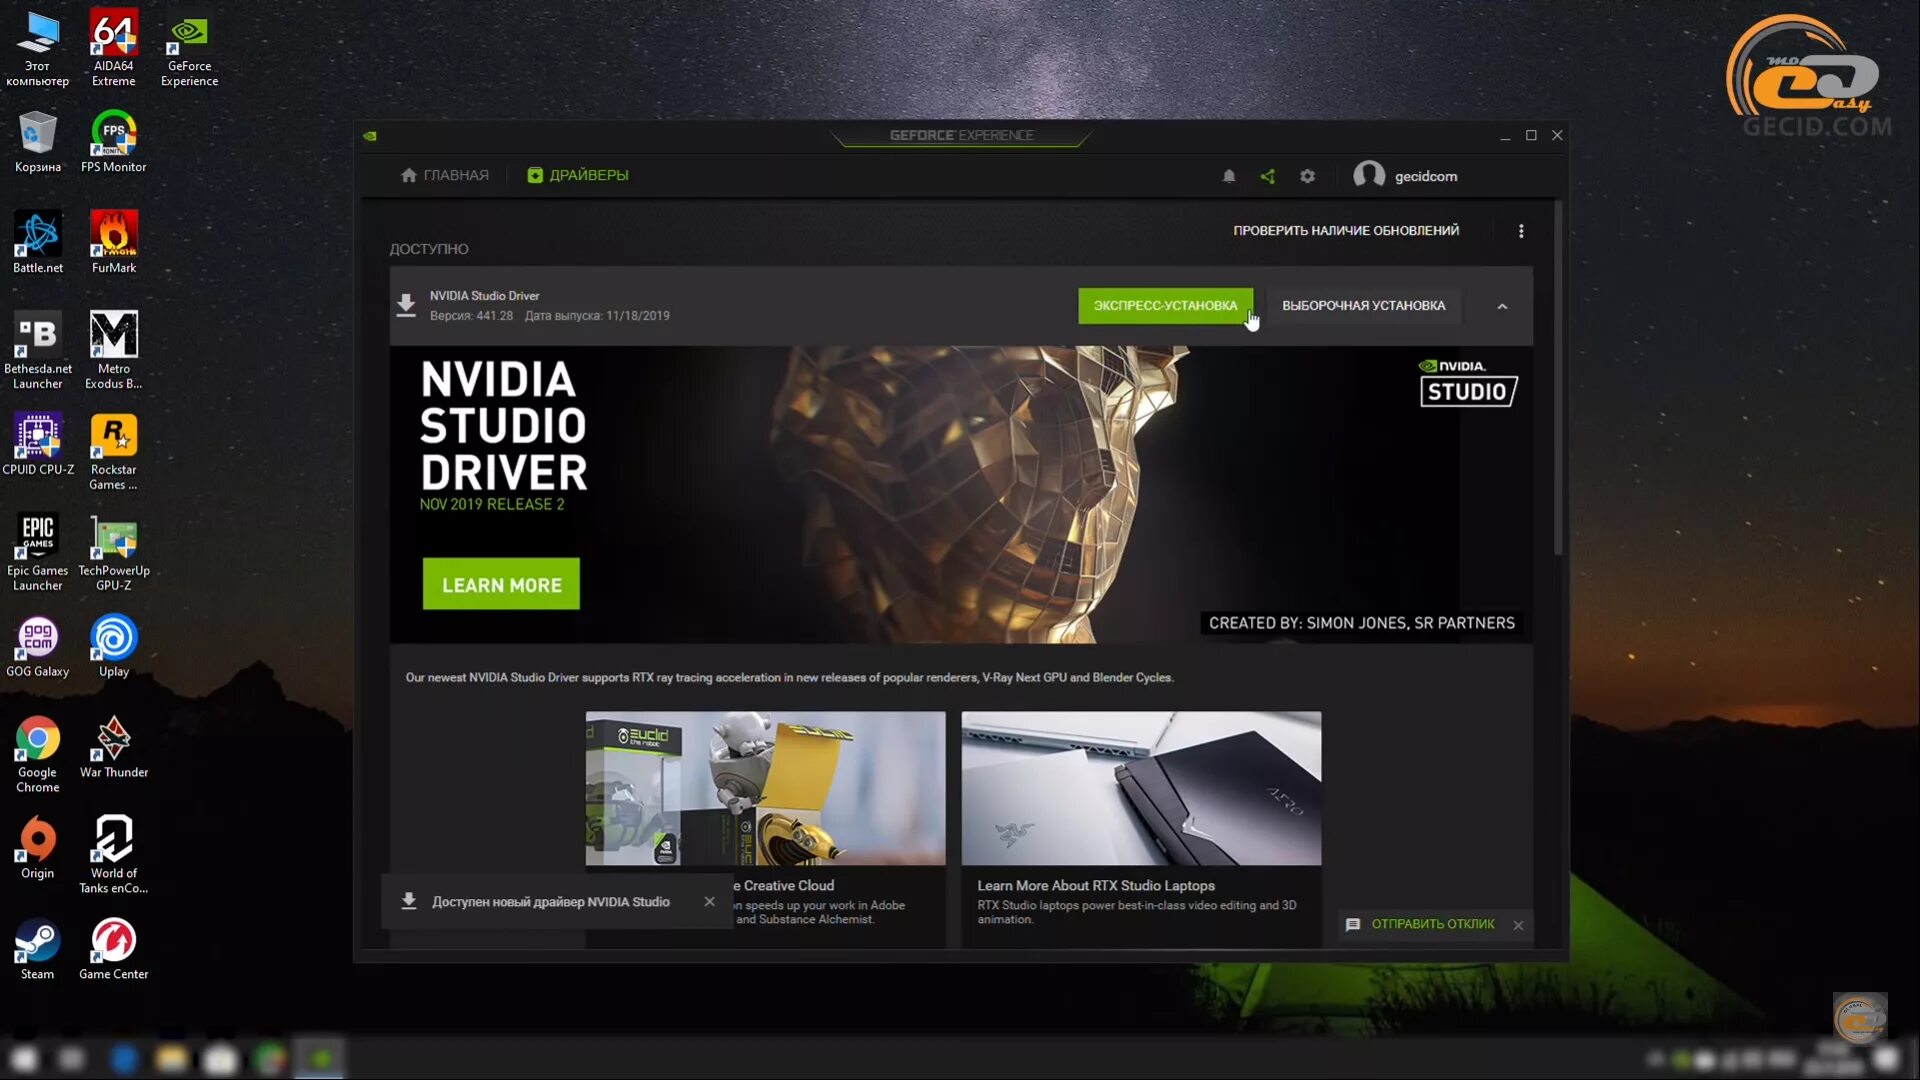 Rtx experience. NVIDIA GEFORCE experience 2060. GEFORCE experience RTX 3060ti. GEFORCE experience 2060 super. RTX 3090 GEFORCE experience.